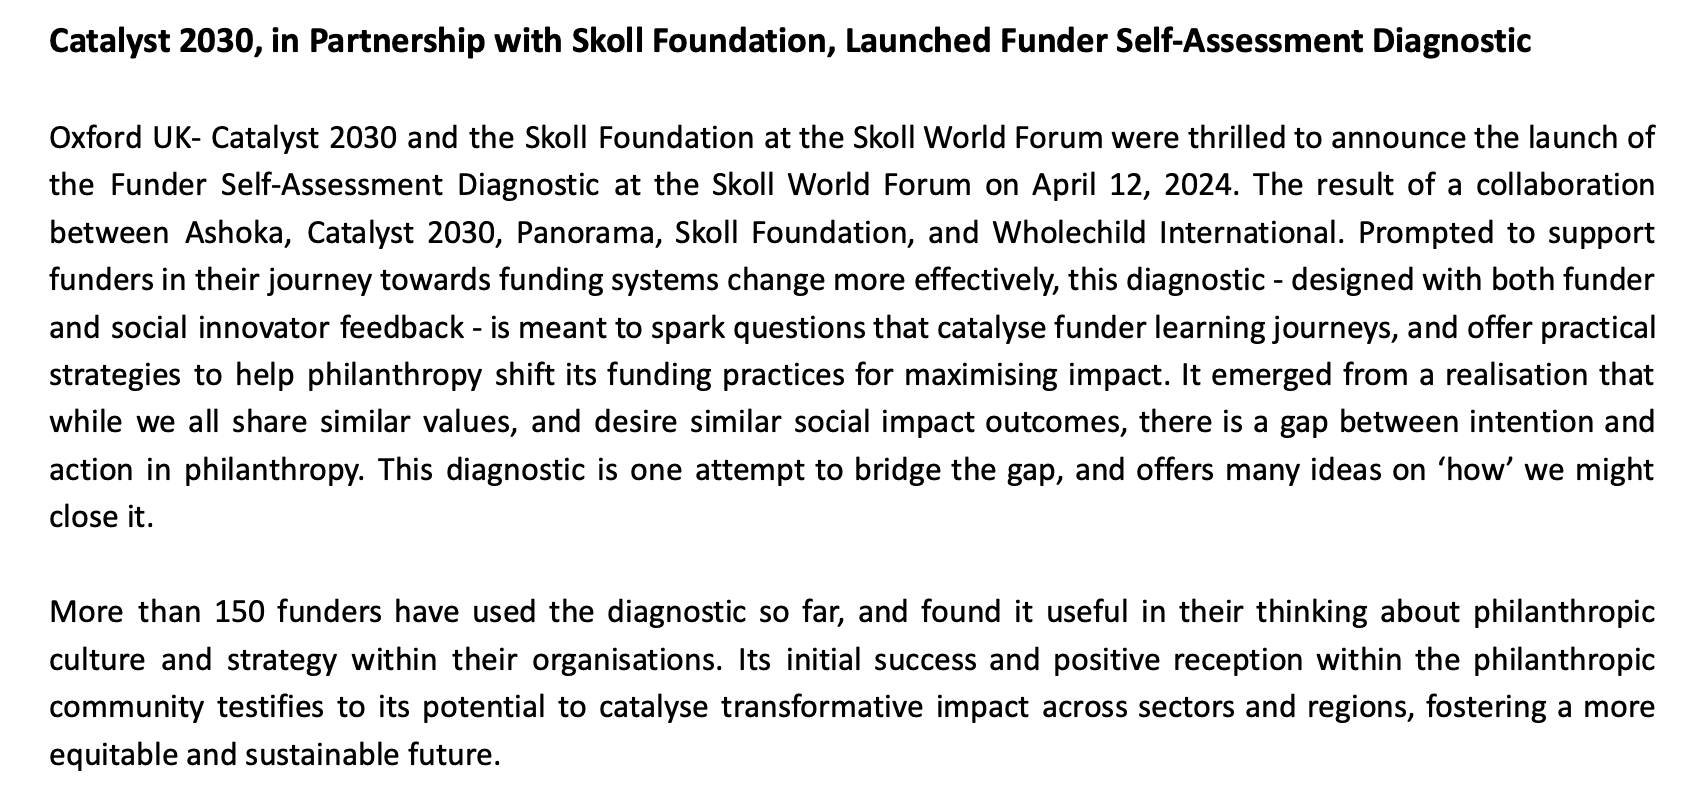 Catalyst 2030 in Partnership with Skoll Foundation Launches Funder Self-Assessment Diagnostic Tool image